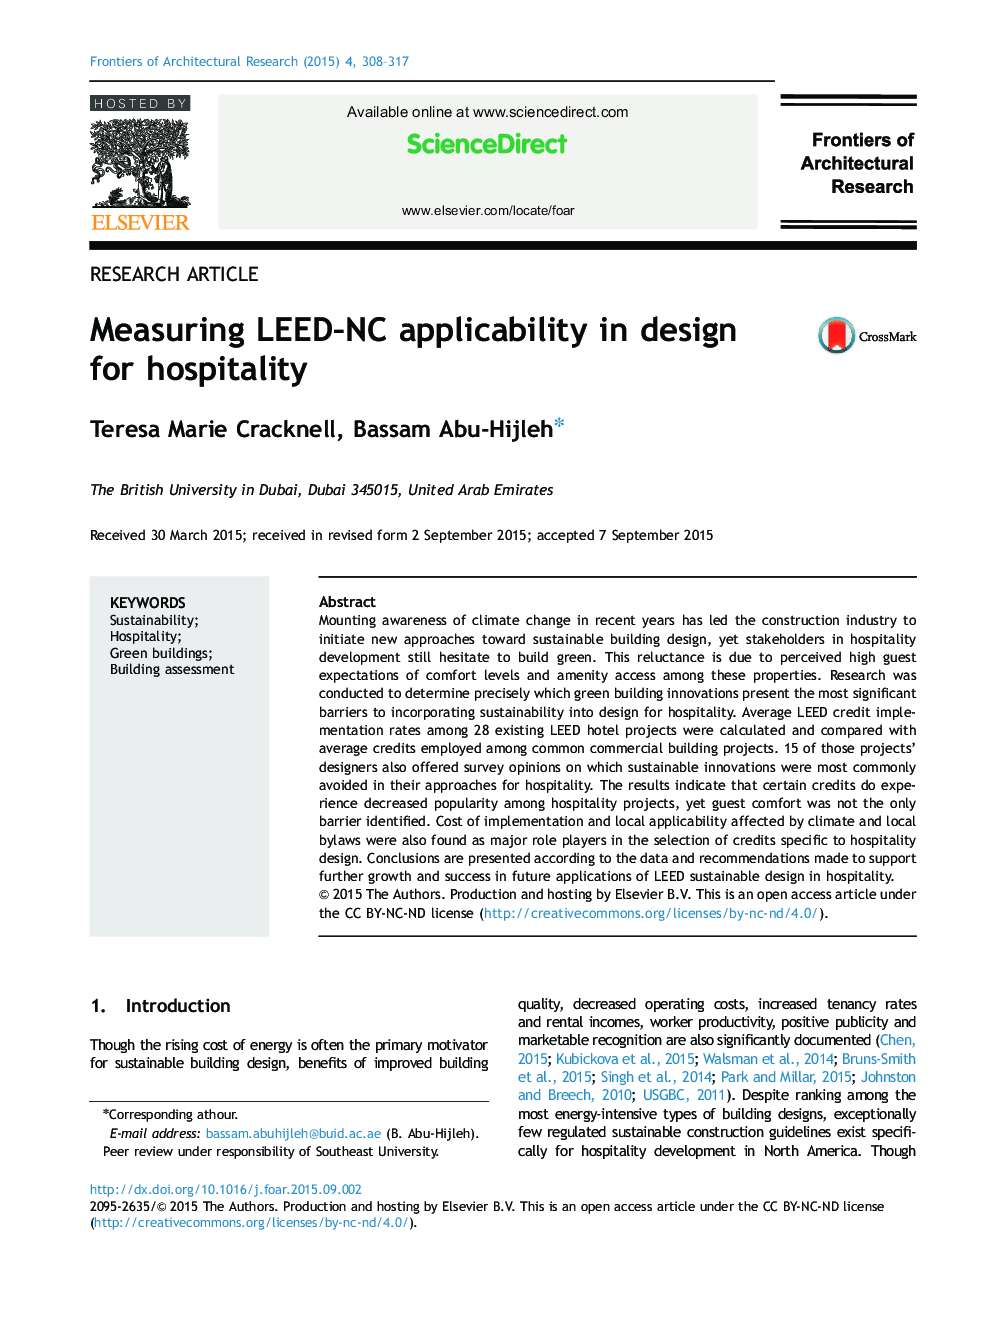 Measuring LEED–NC applicability in design for hospitality 